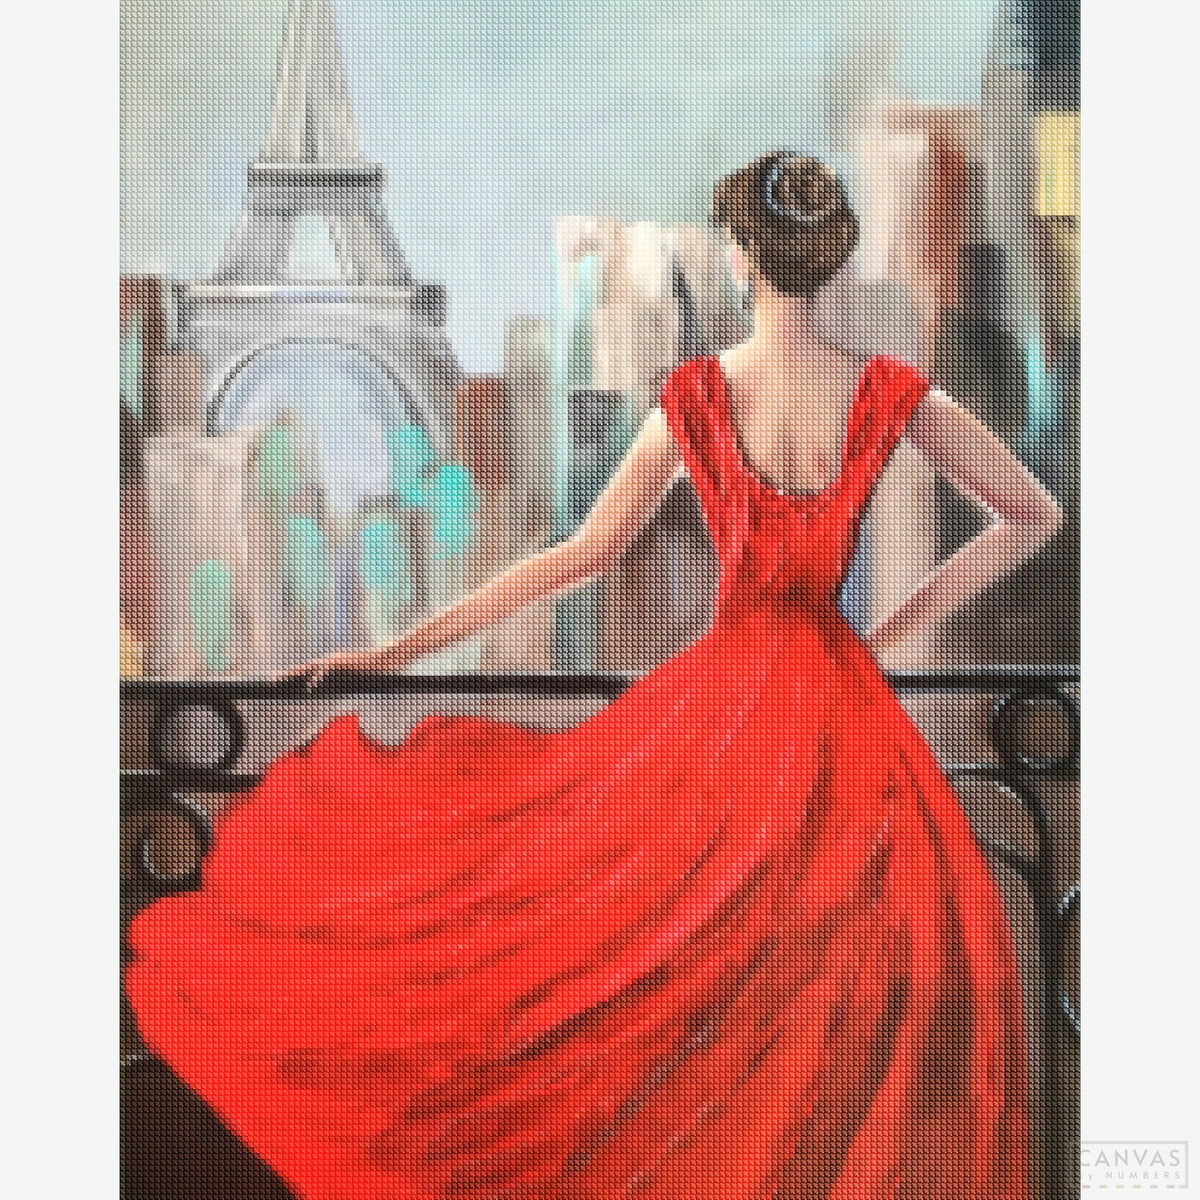 Parisian Girl in Red Dress - Diamond Painting-Create a romantic Parisian scene with our Parisian Girl in a Red Dress Diamond Painting Kit. Capture the elegance of Paris with this stunning, detailed artwork.-Canvas by Numbers